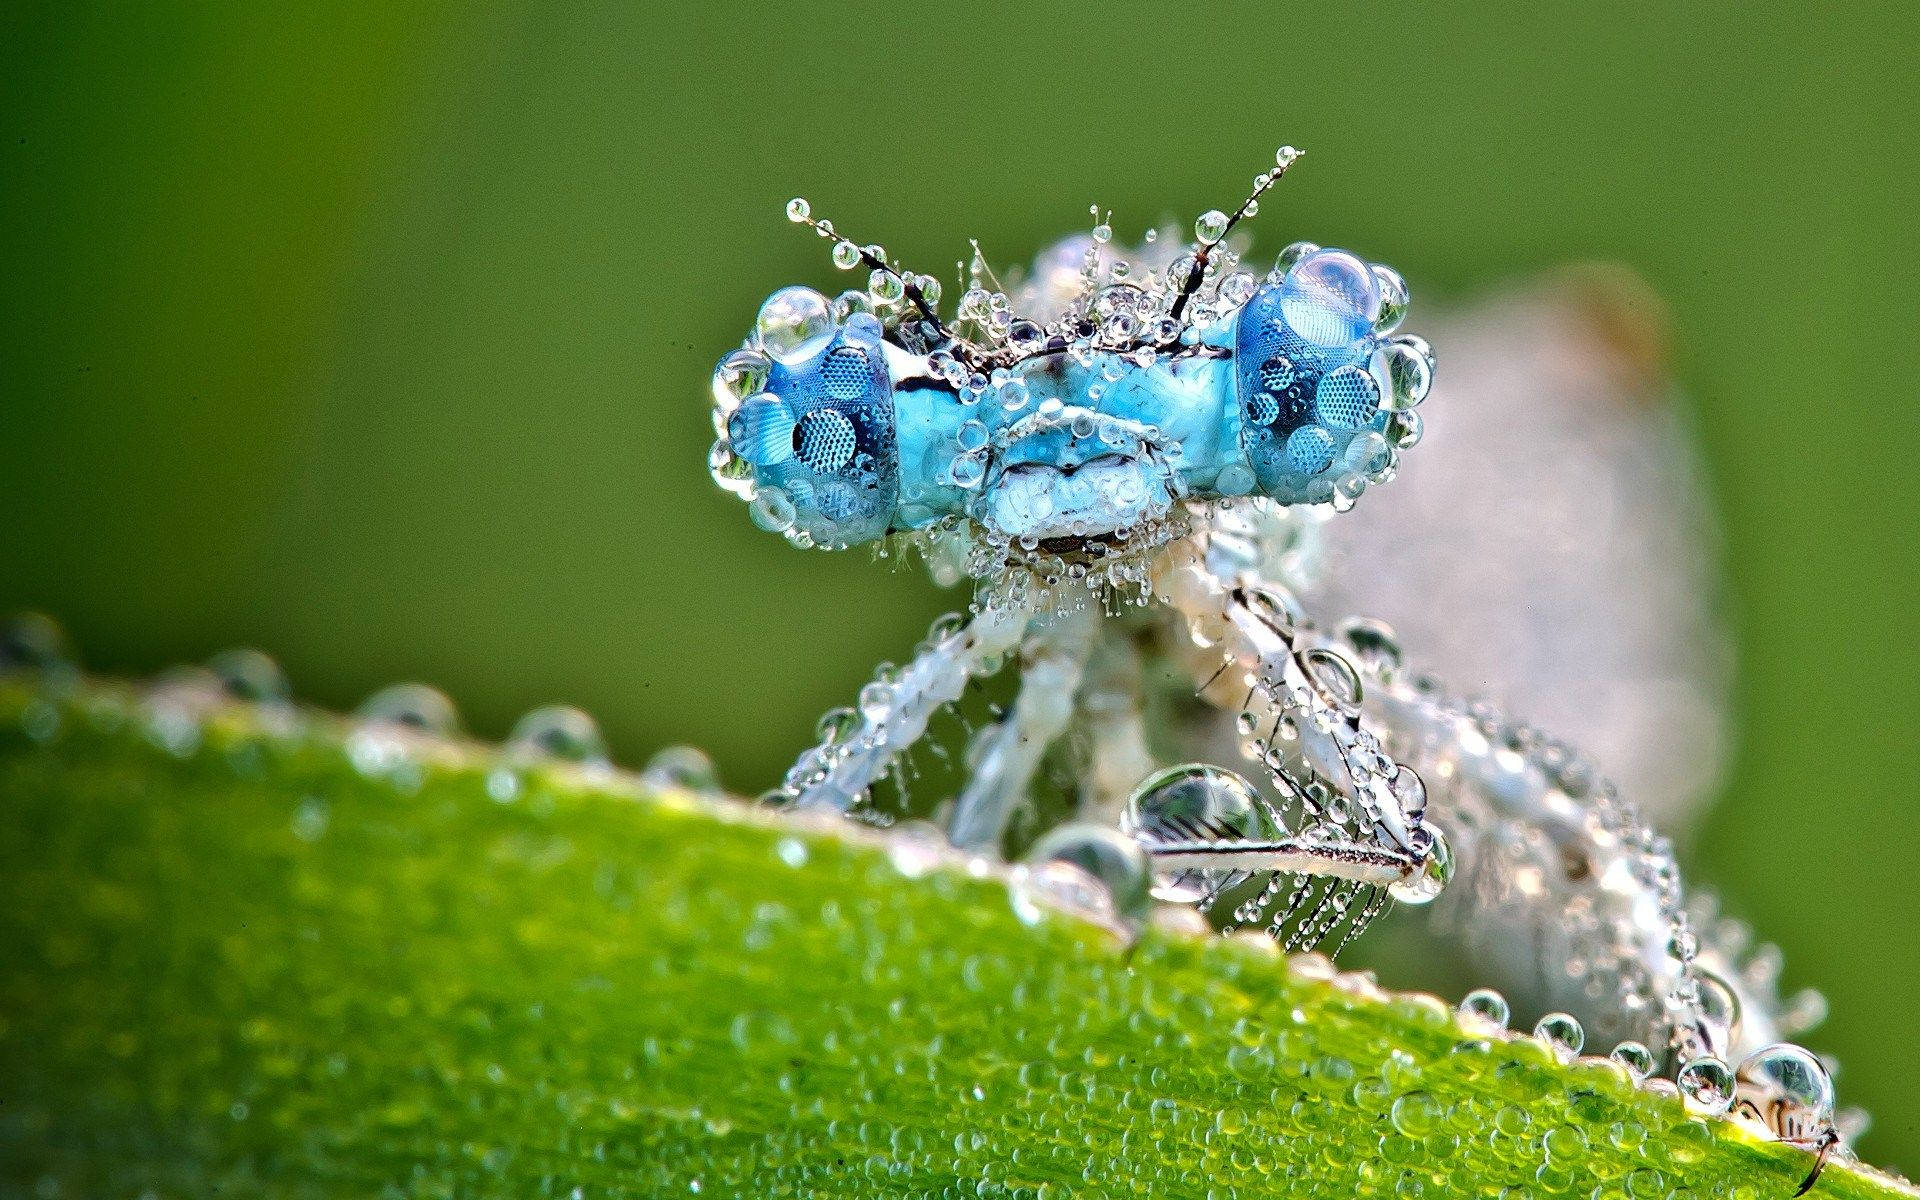 Insect Dragonfly With Water Droplets Background